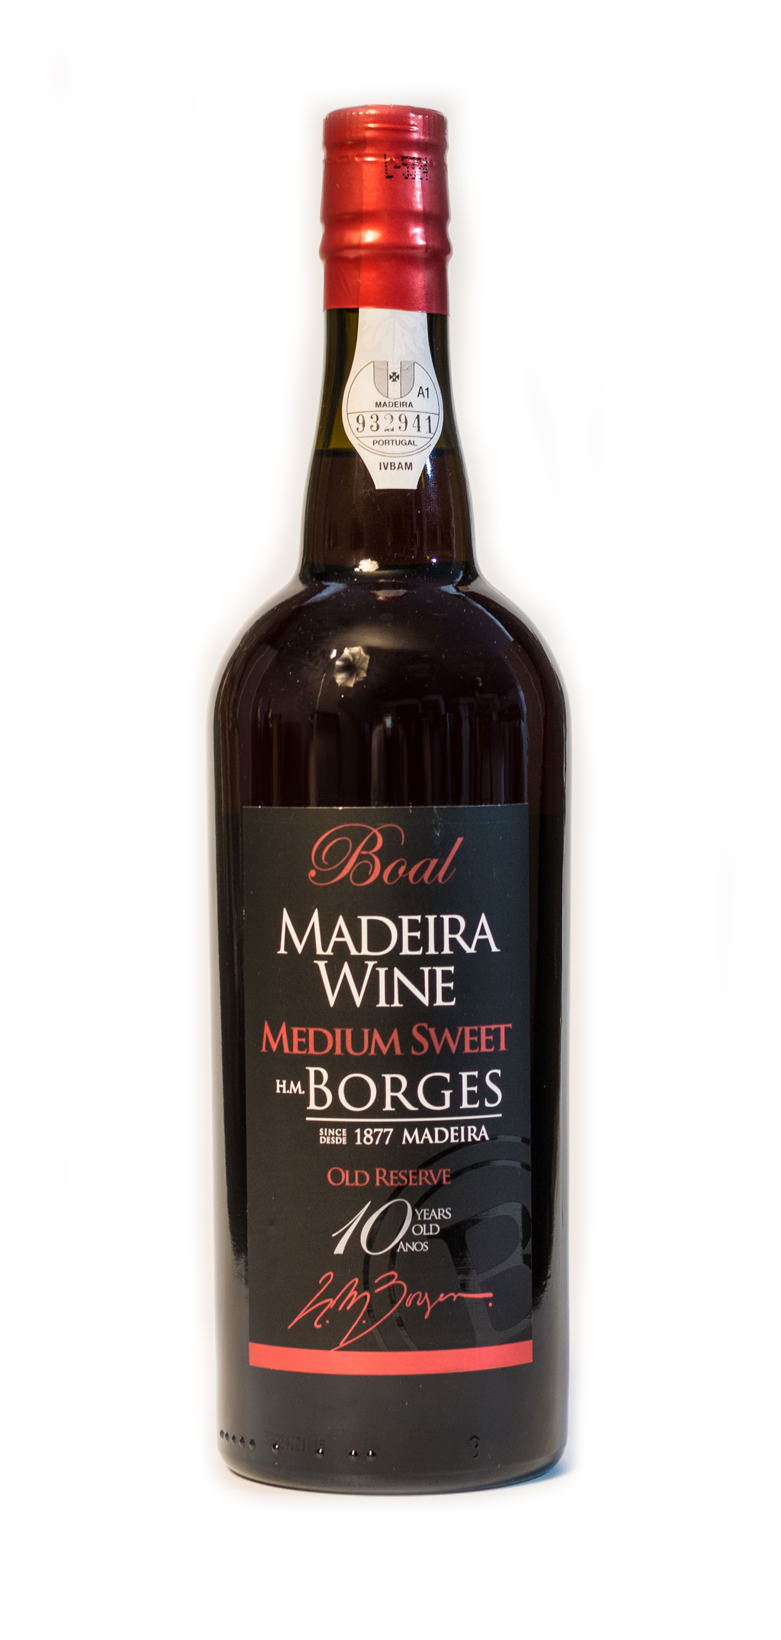 HM Borges Madeira 10Y BOAL Medium Sweet 75cl